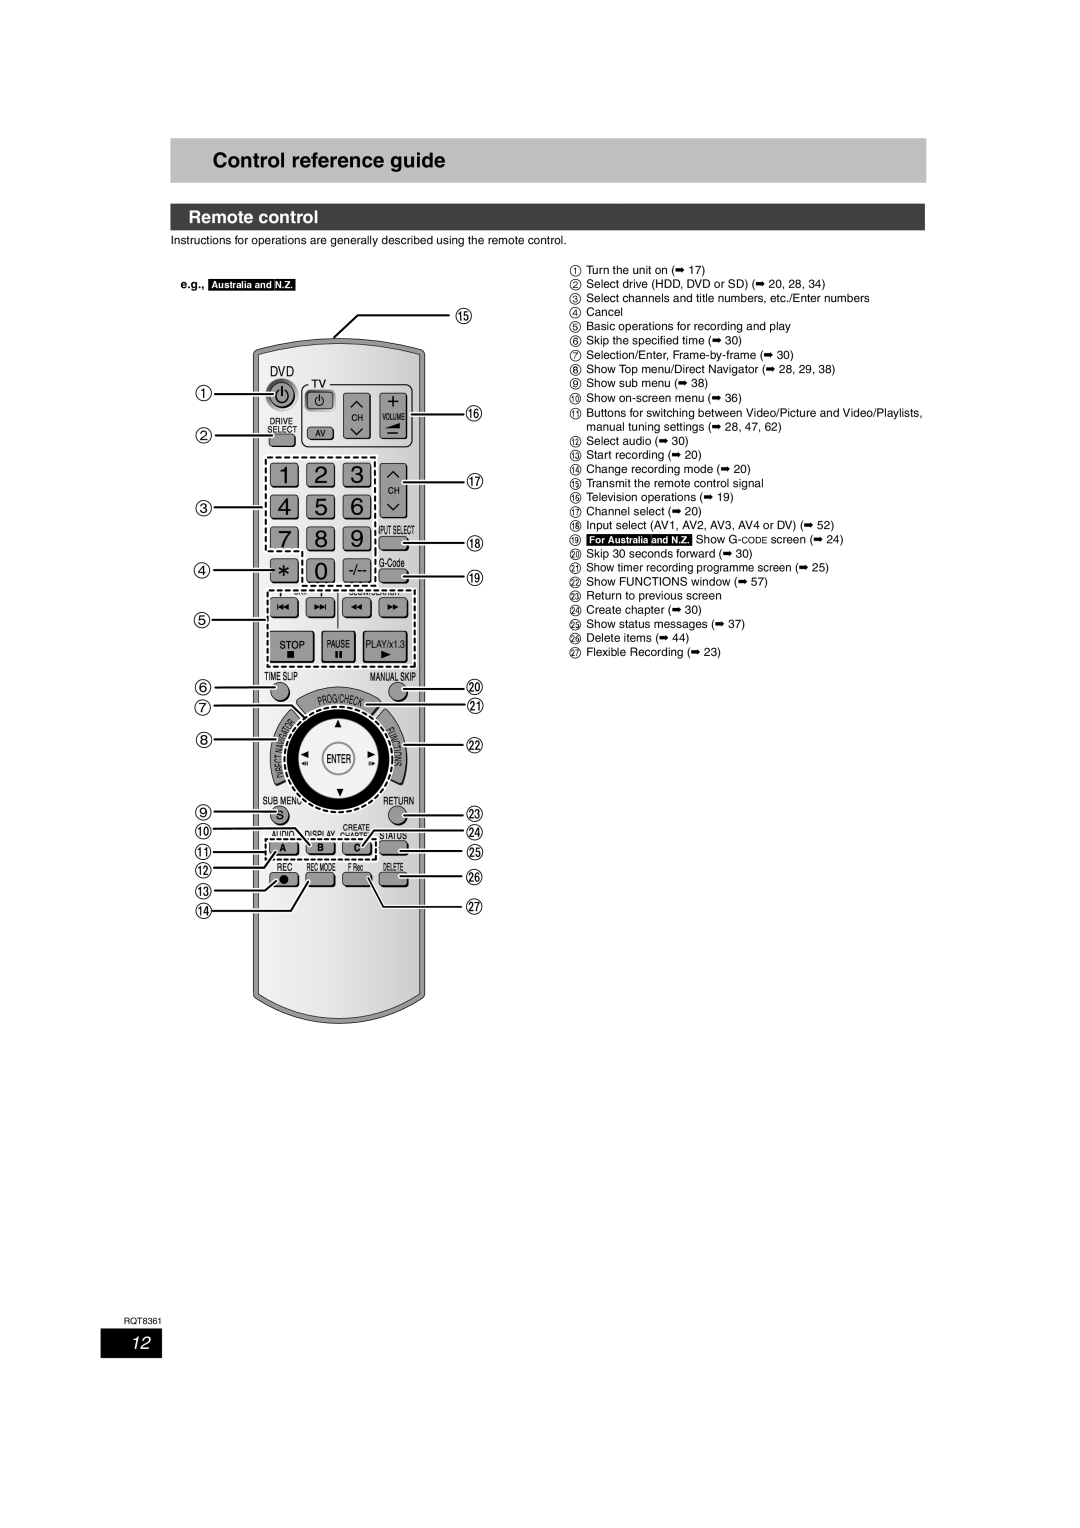 Philips DMR-EH55 operating instructions Control reference guide, Remote control 